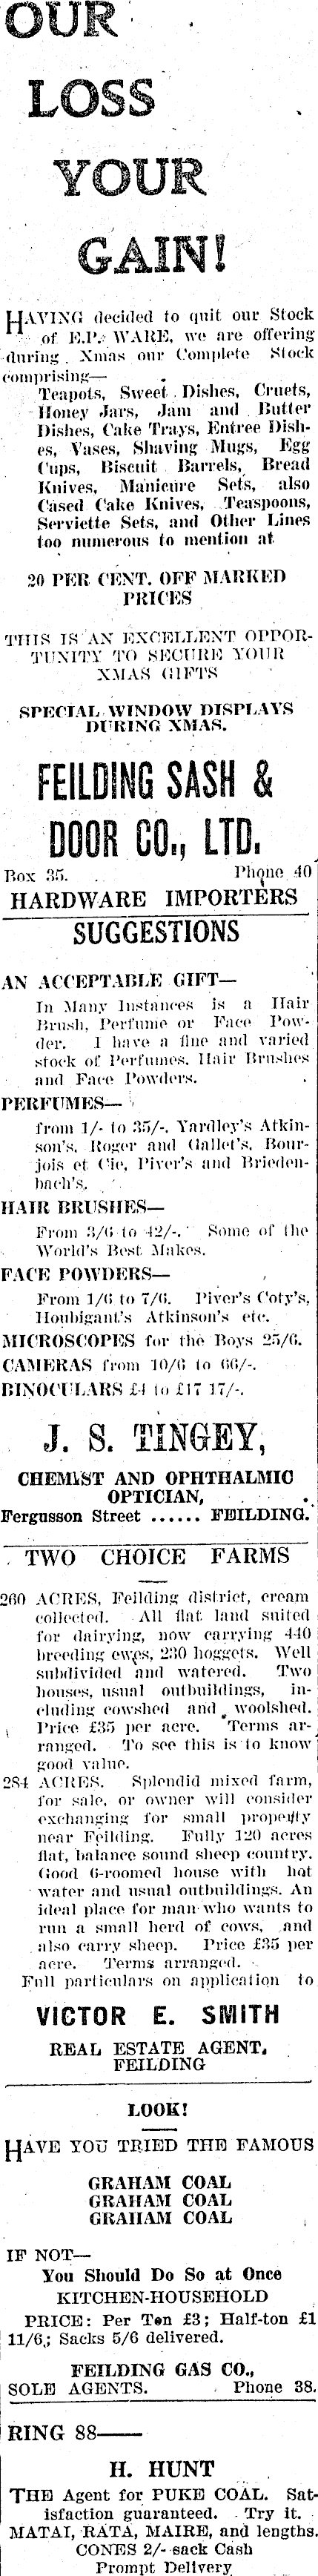 Papers Past Newspapers Feilding Star 8 December 1927 Page 1 Advertisements Column 3